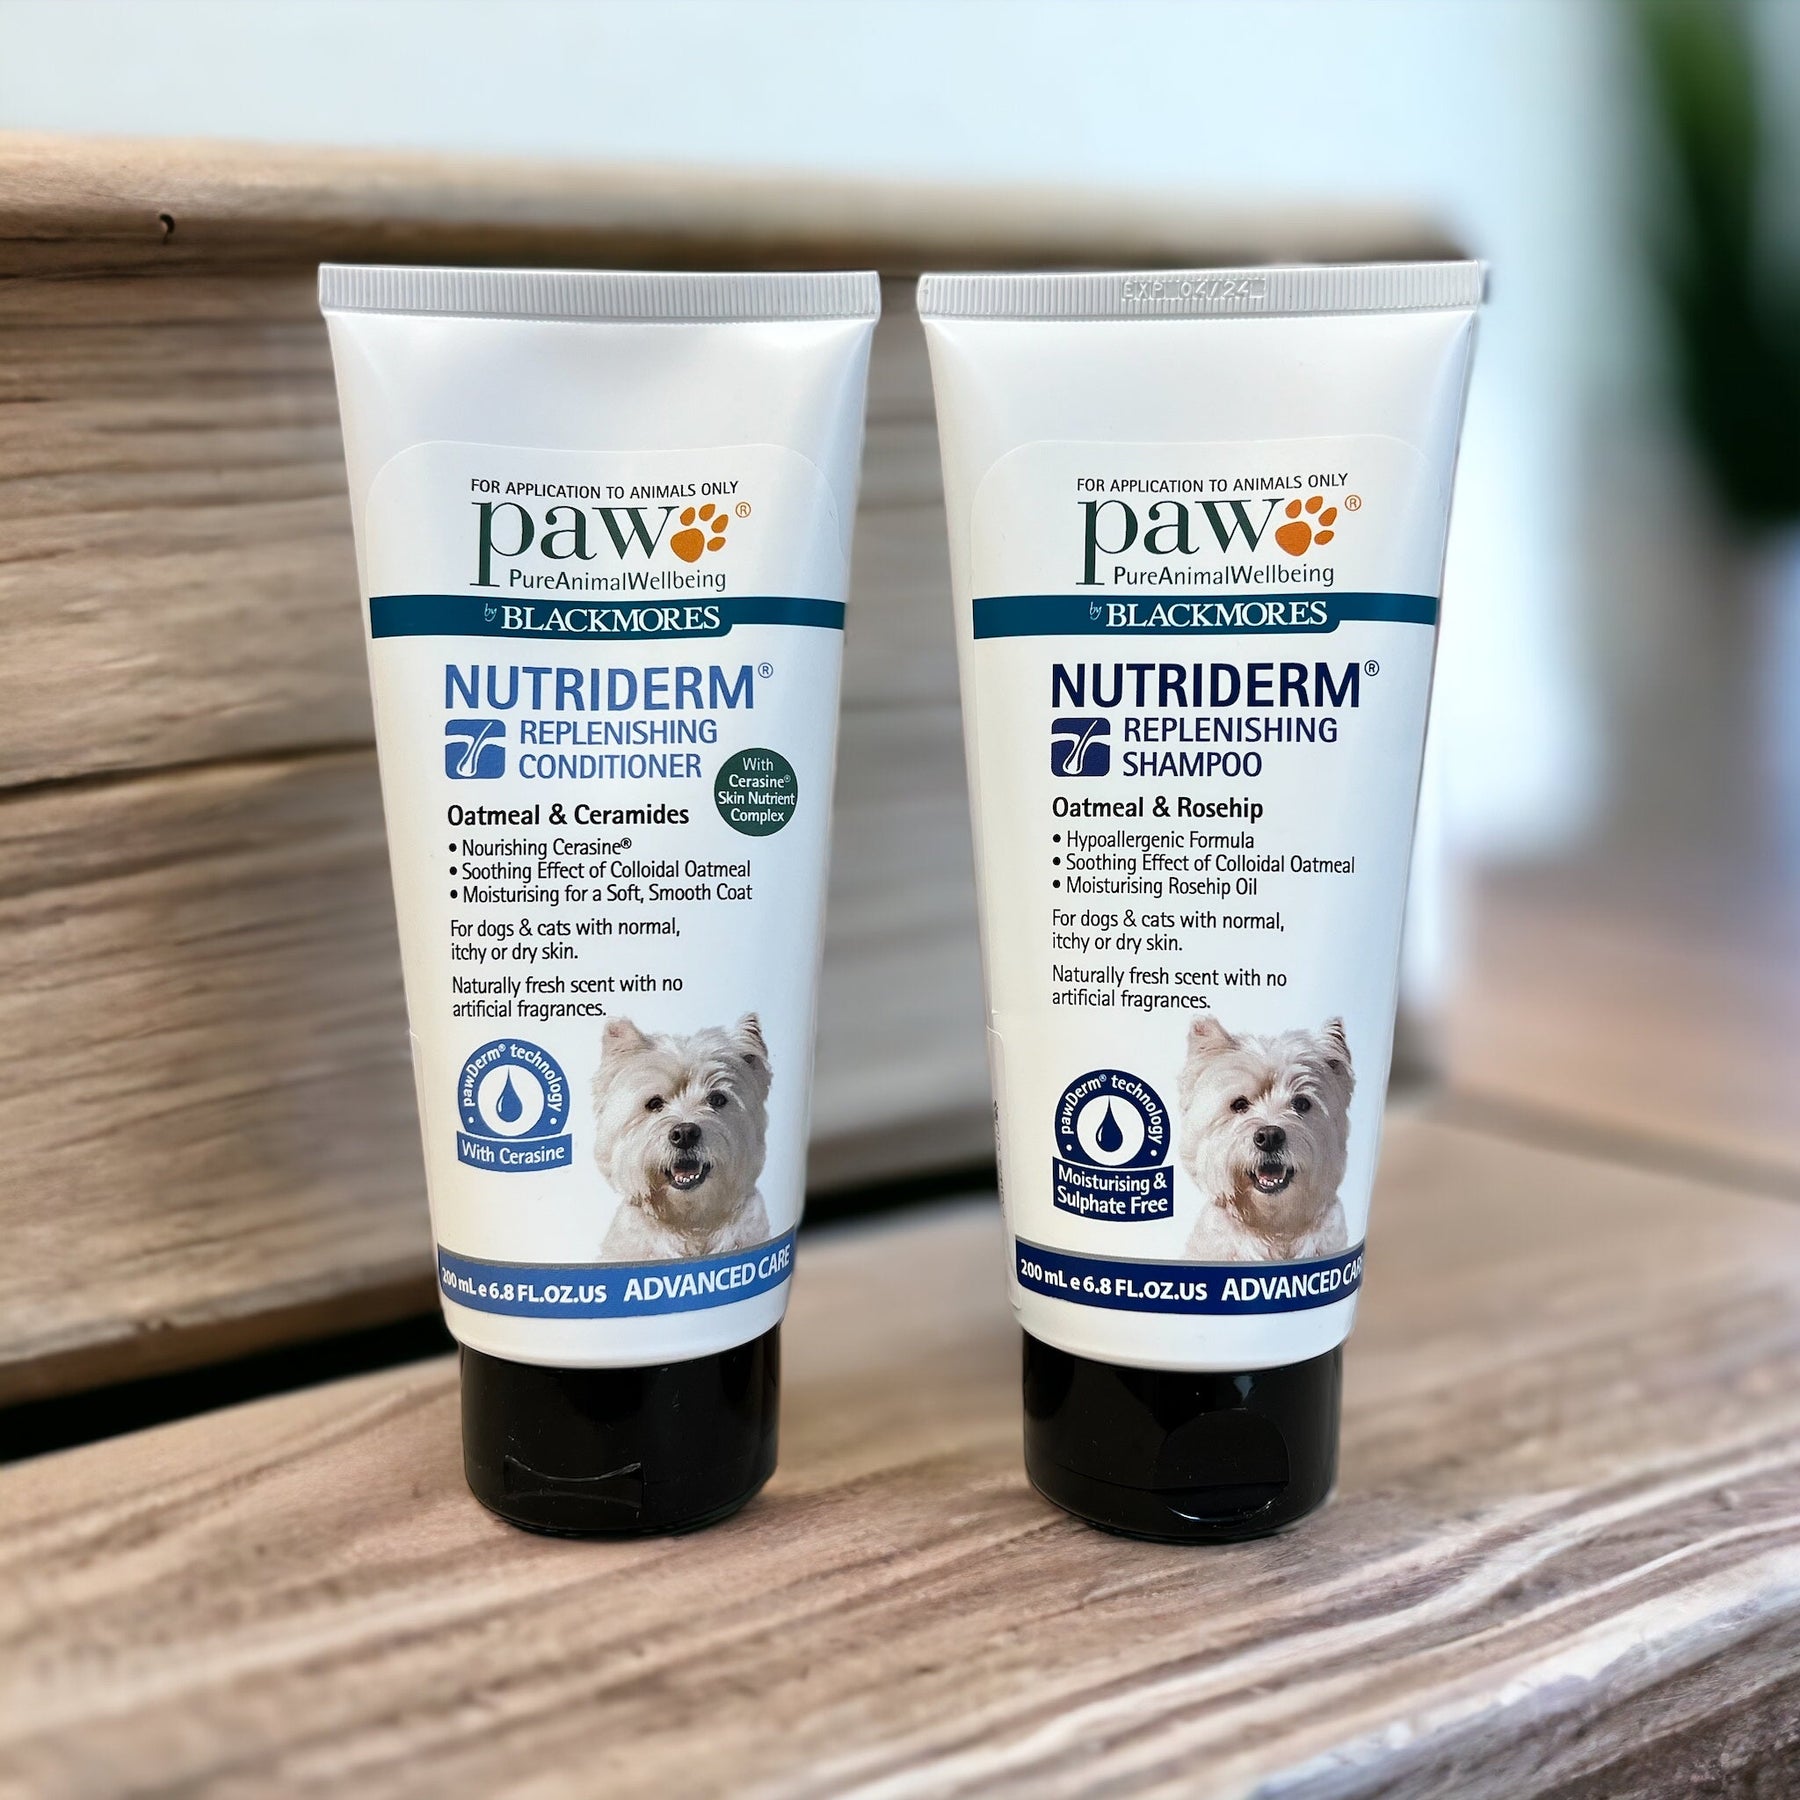 Blackmores PAW NutriDerm Bundle: Replenishing Care for Dogs and Cats - PAWS CLUB